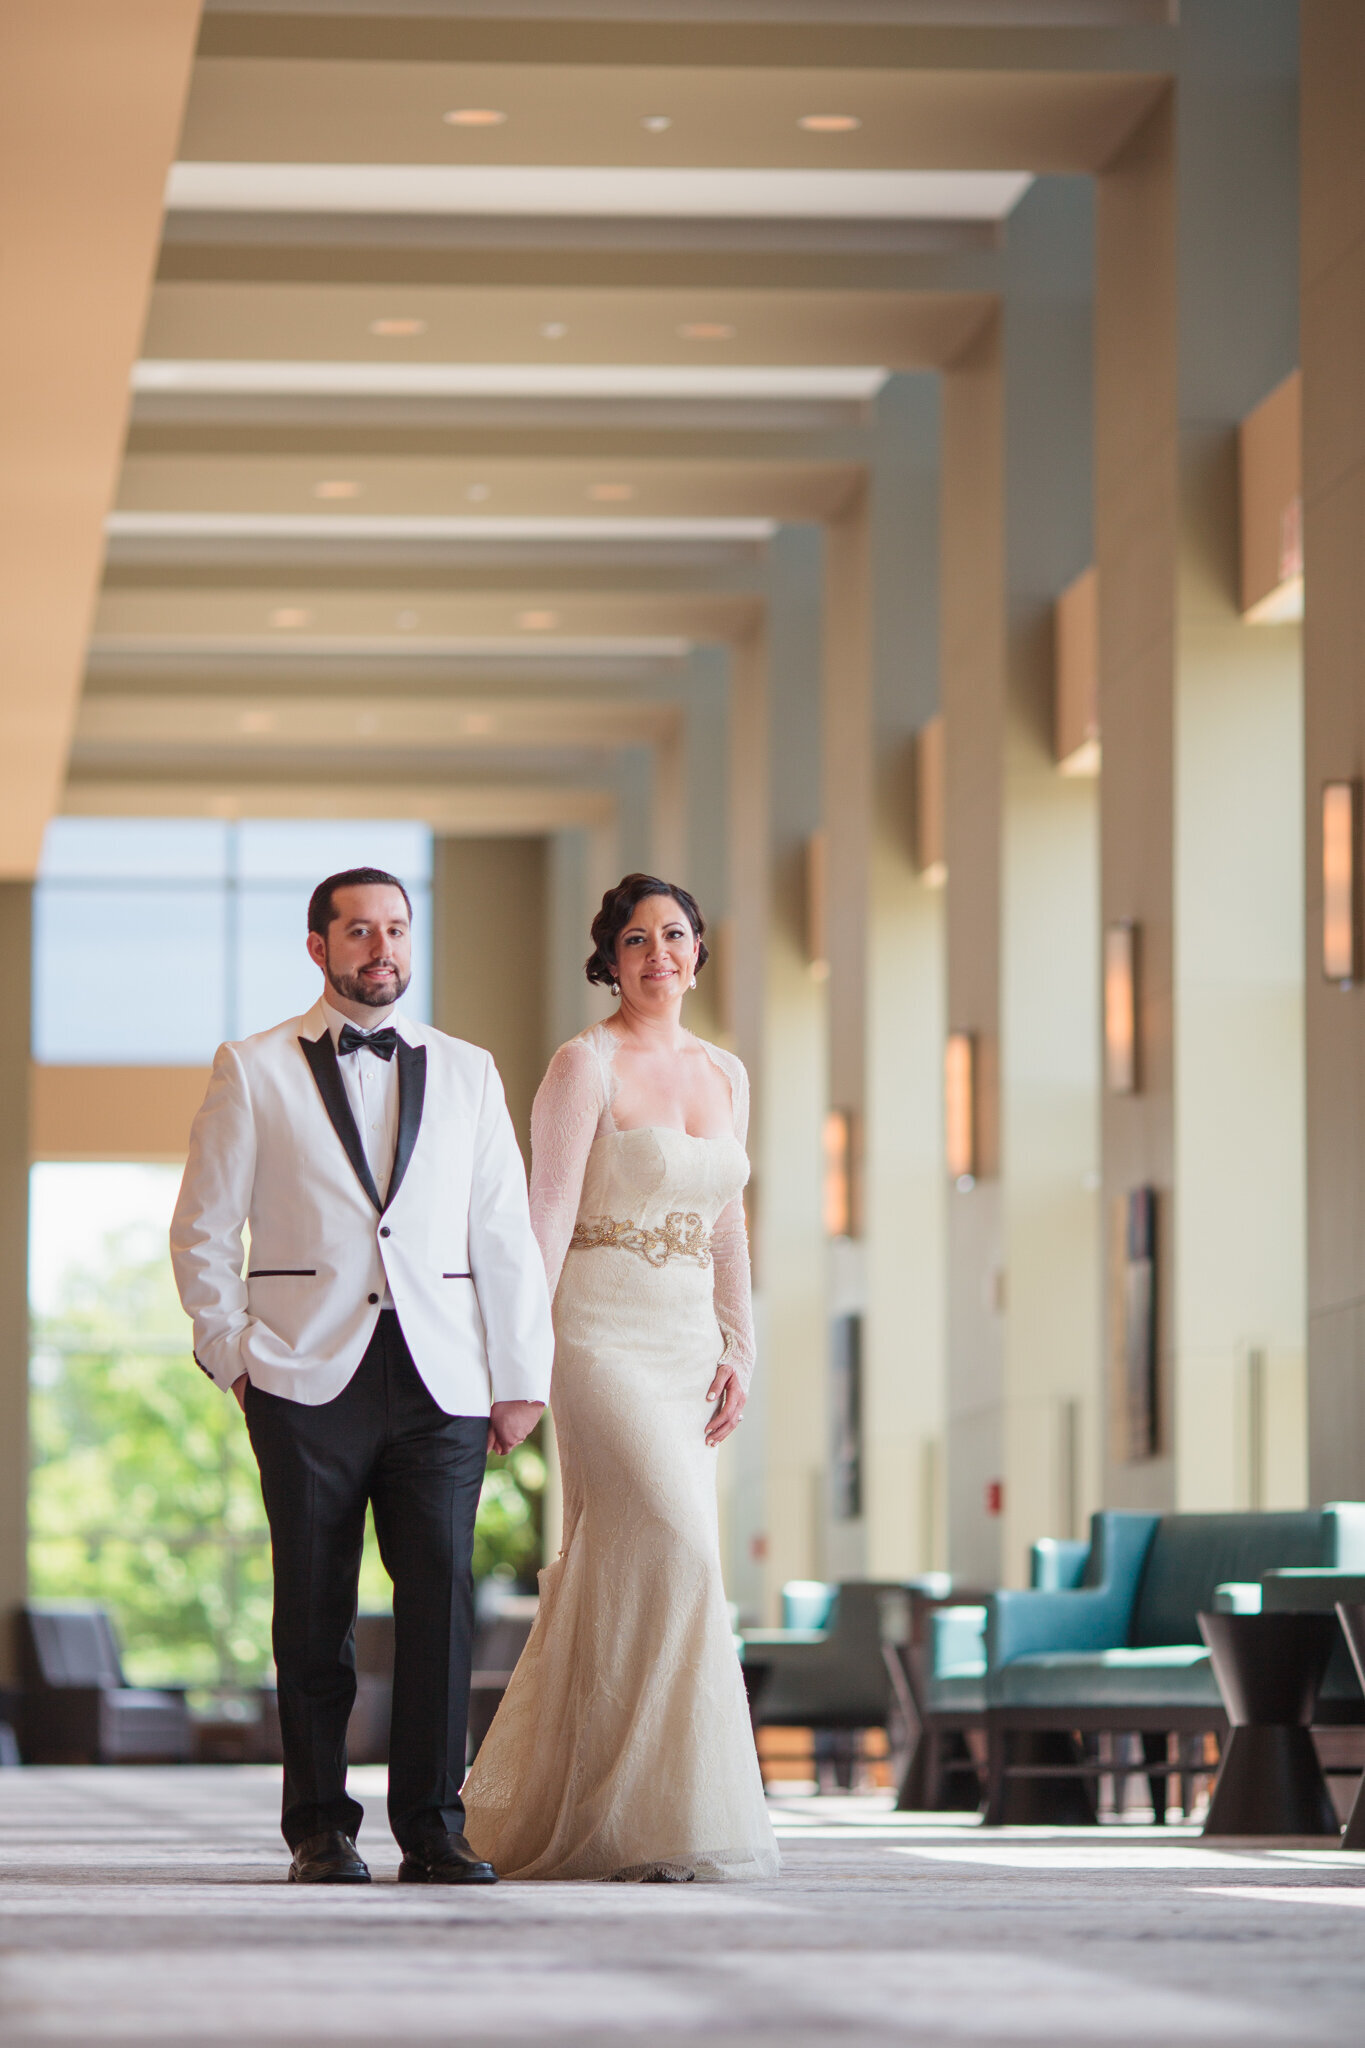 Bride and groom hold hands and walk through venue lobby